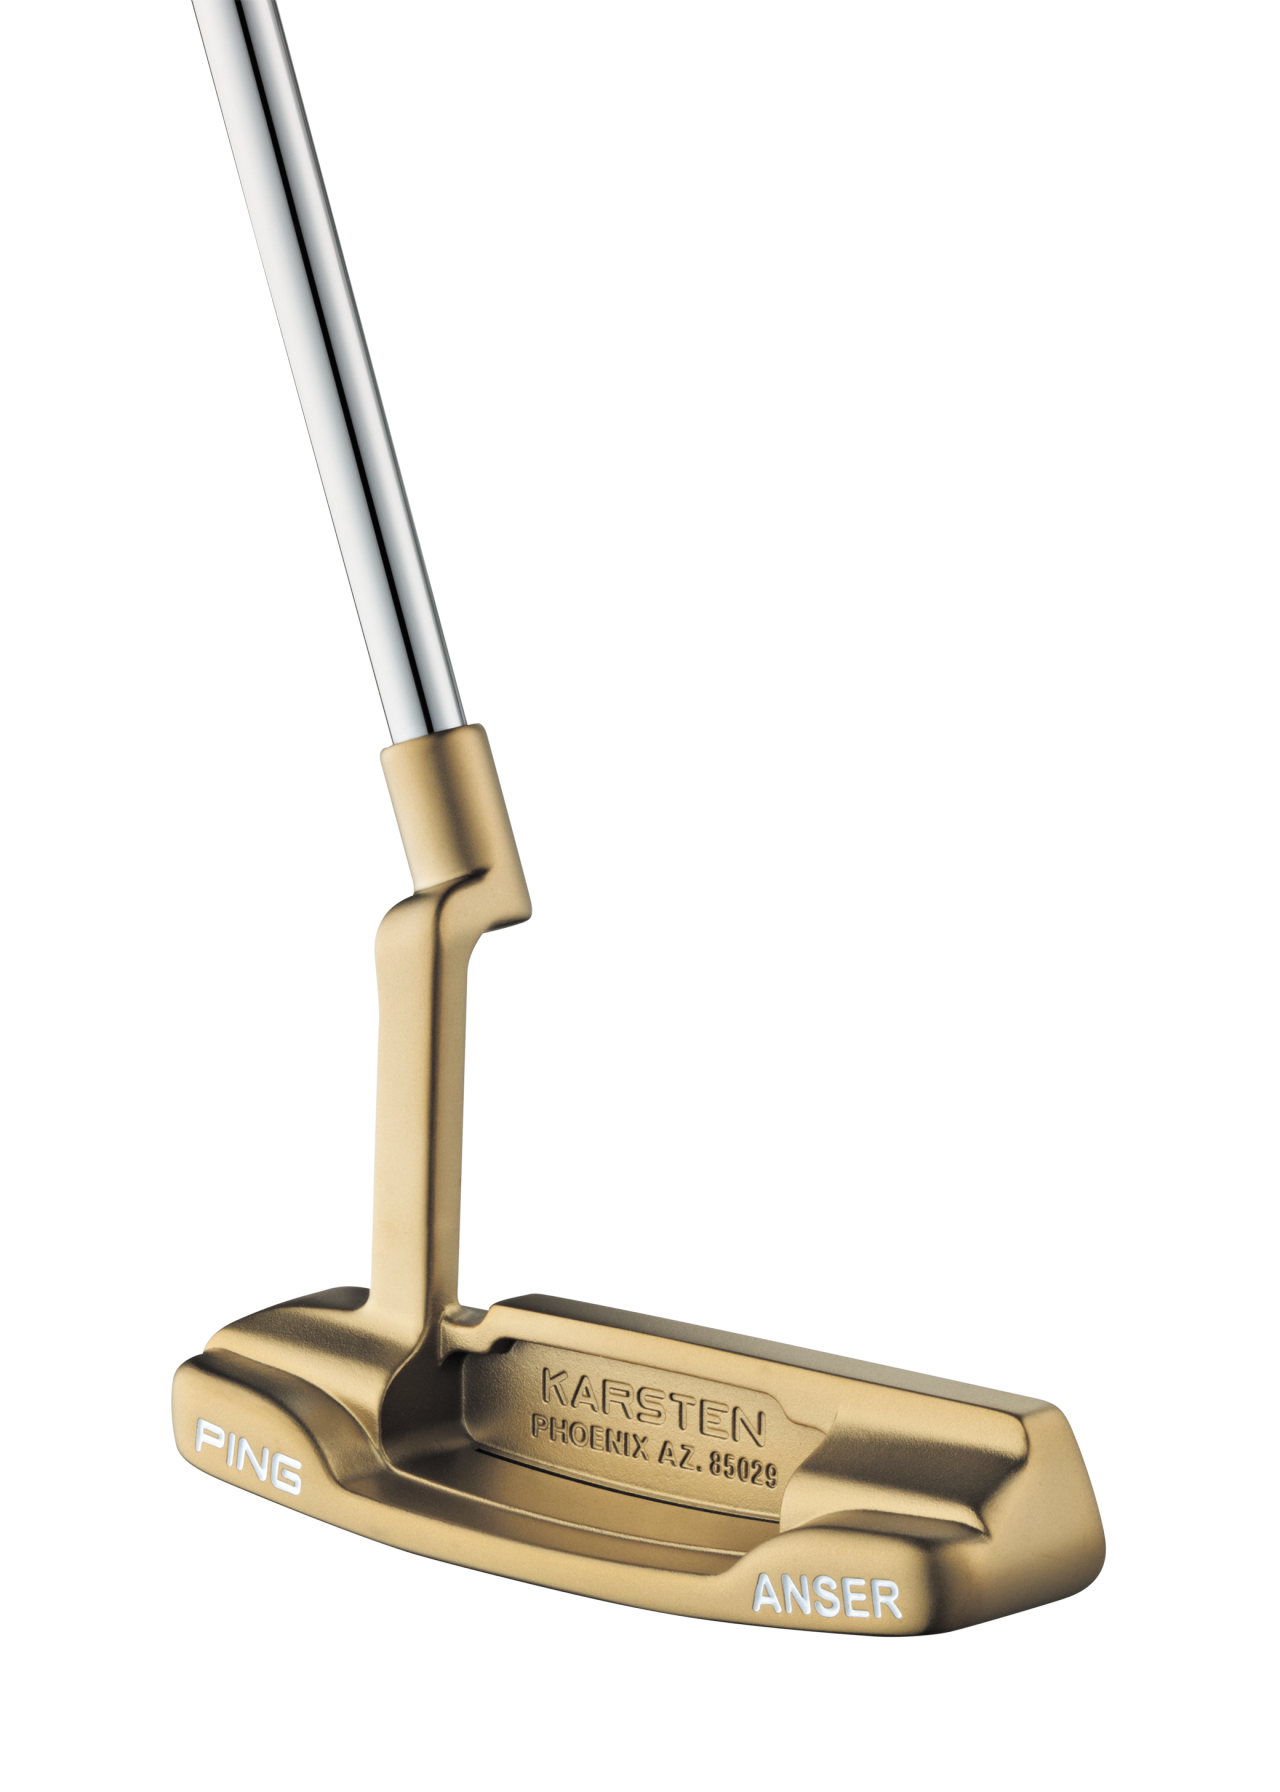 How the Ping Anser putter, one of the most iconic clubs in golf